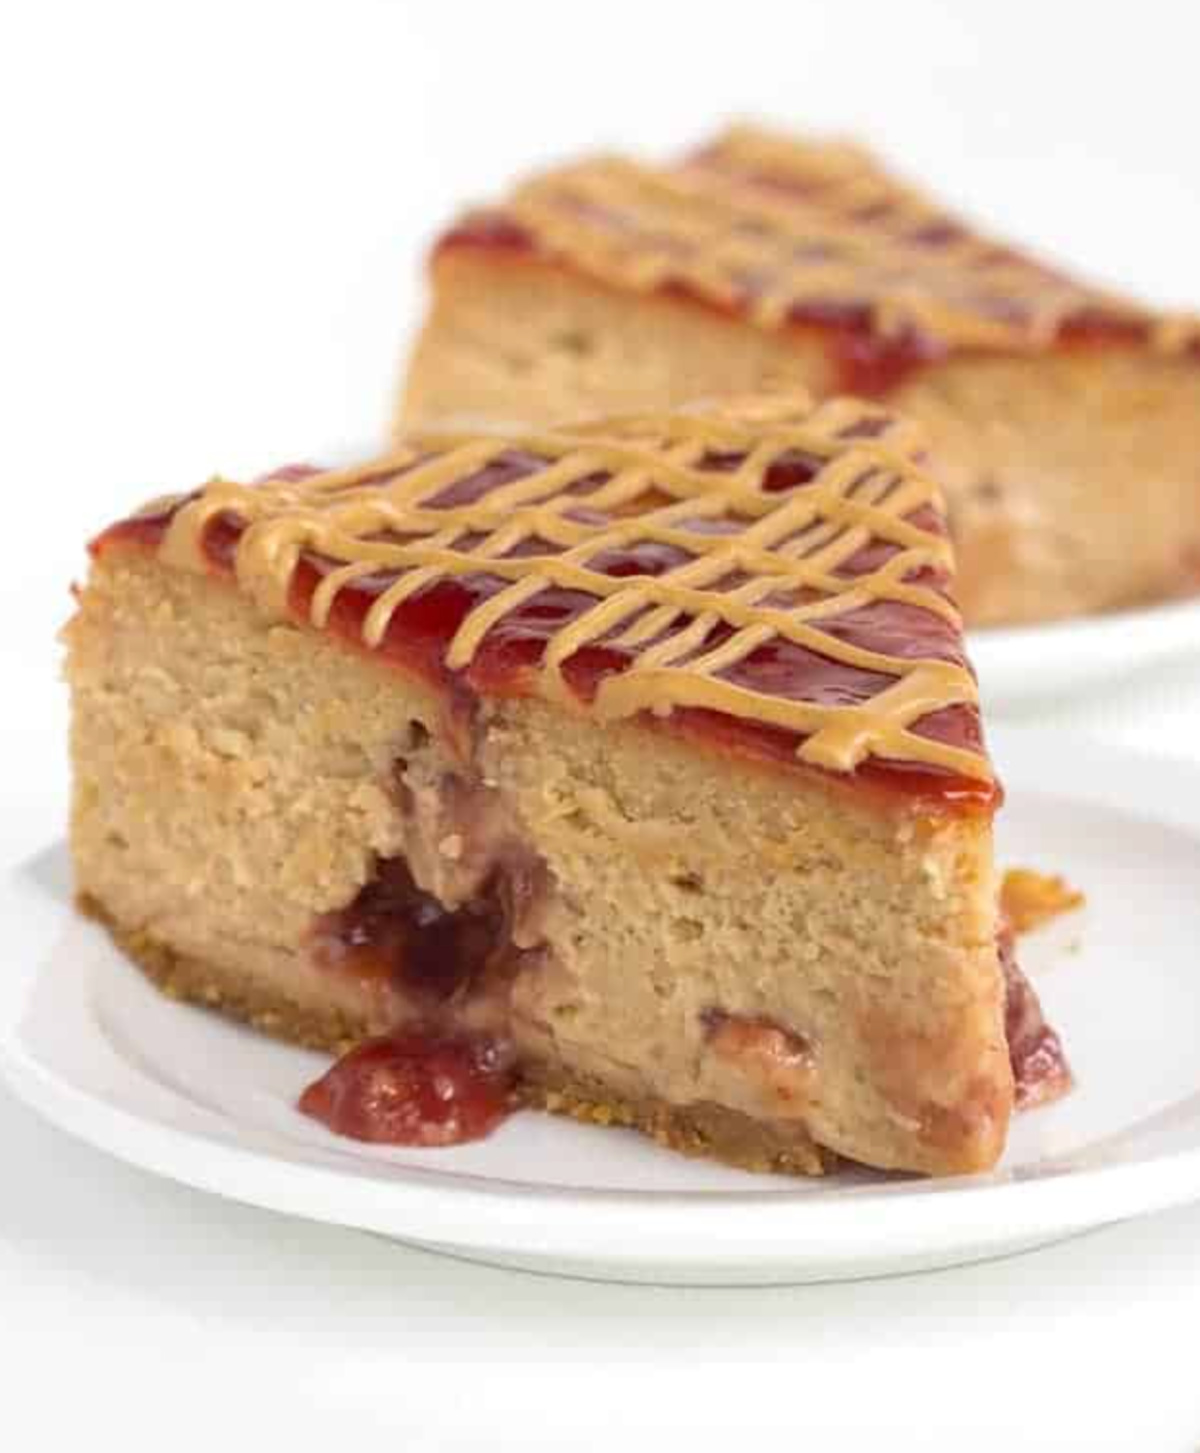 slice of peanut butter and jelly cheesecake on plate